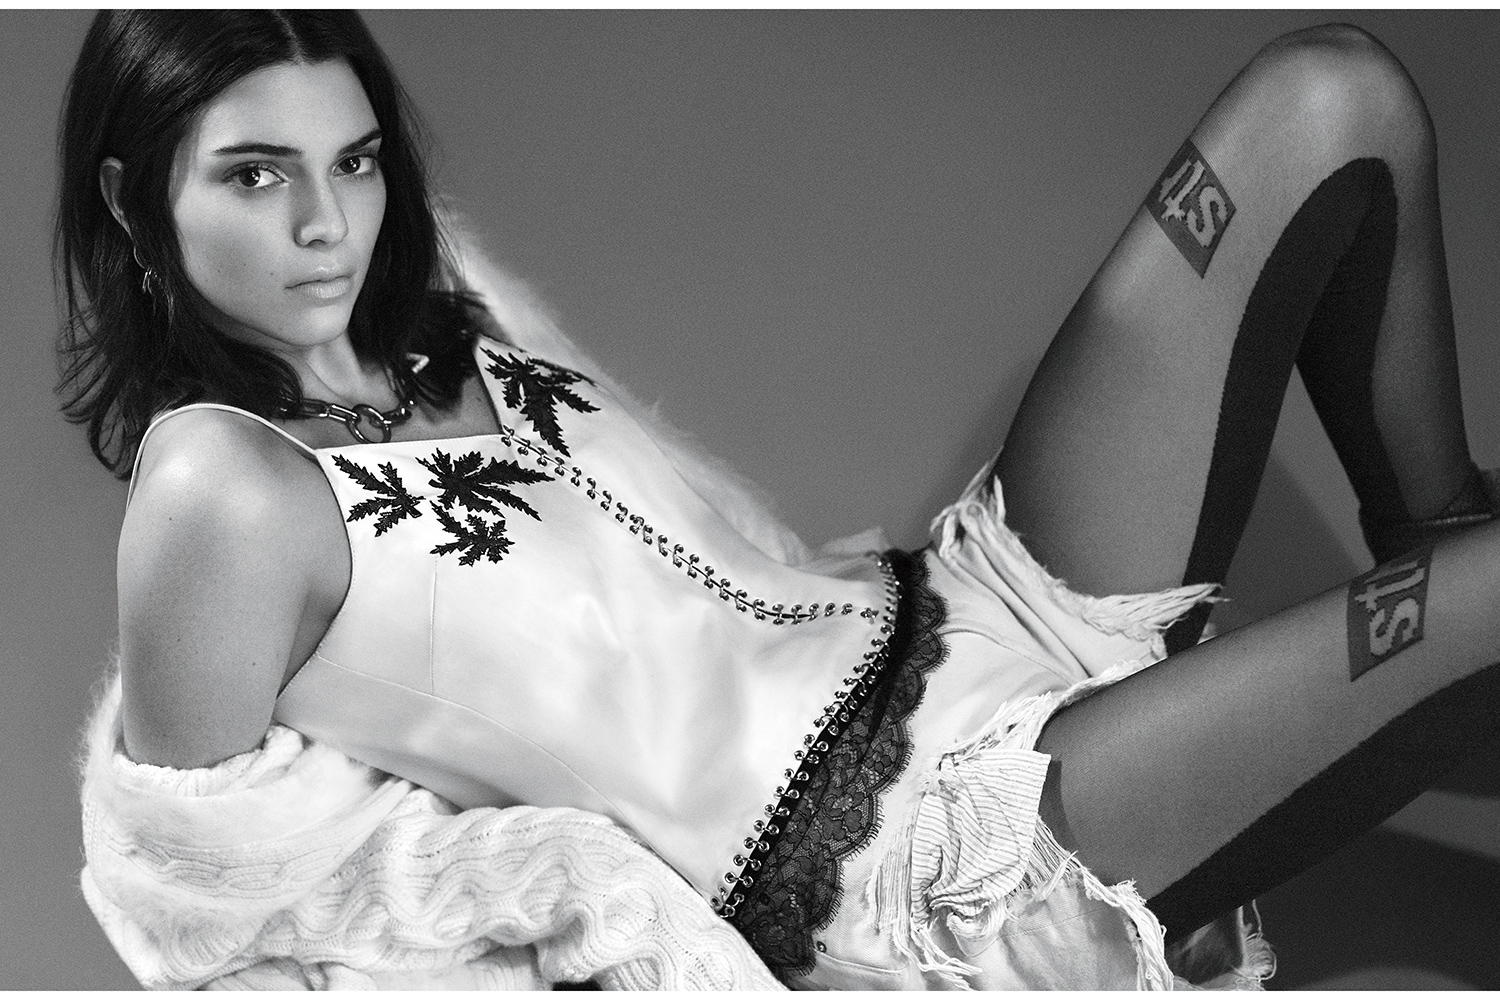 Kendall Jenner Covers Vogue Magazine & People Are Kinda 